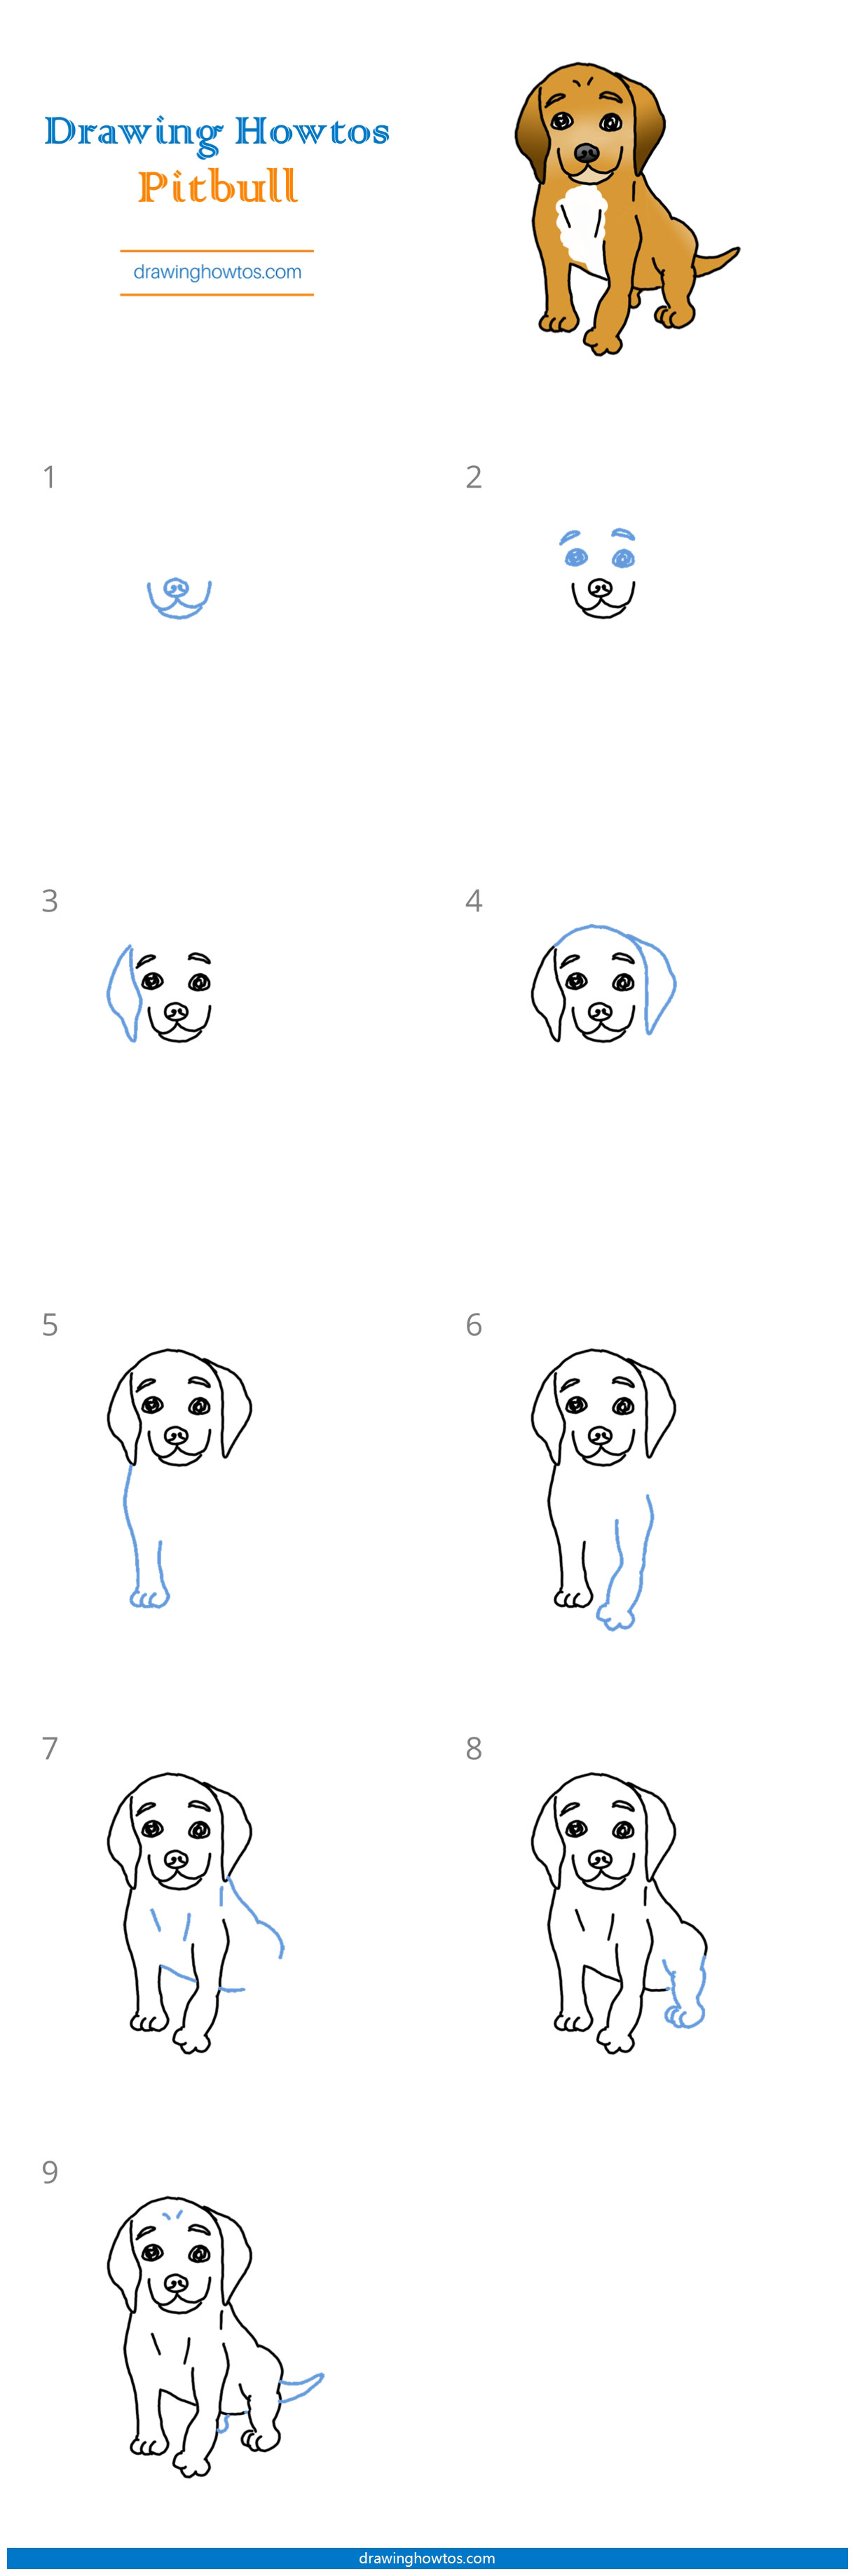 How to Draw a Pitbull Step by Step